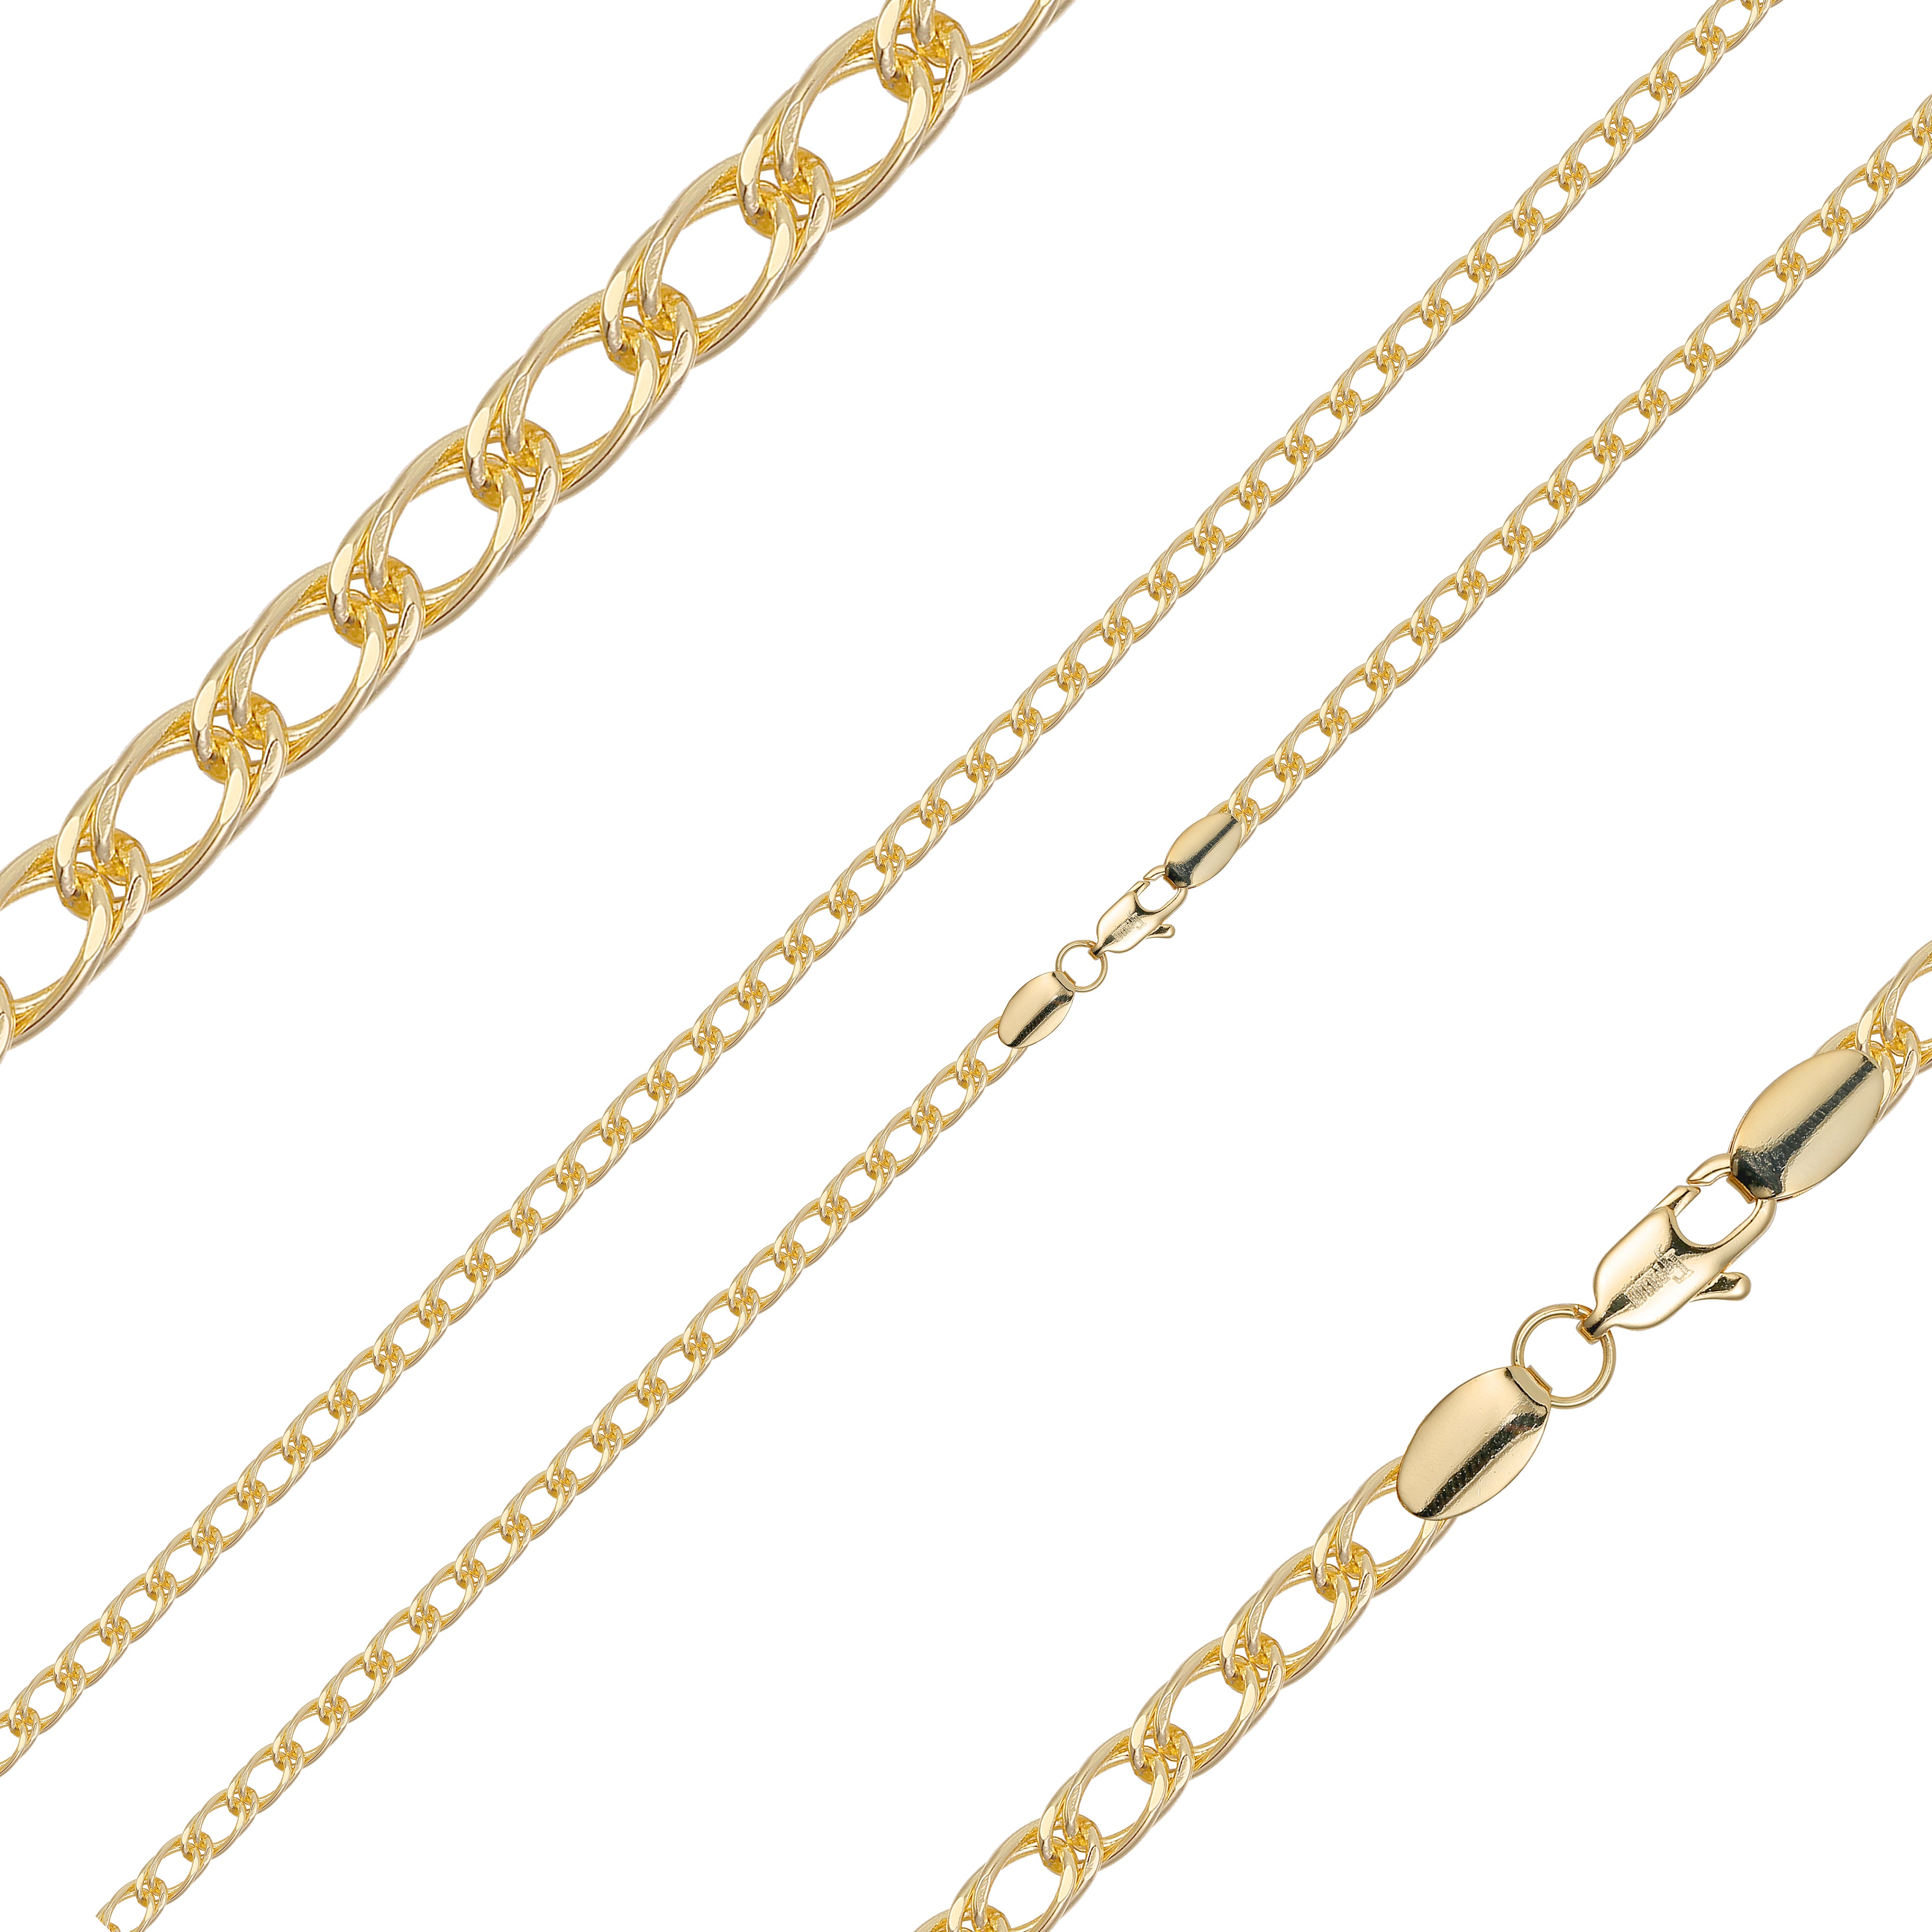 Double curb link chains plated in 14K Gold, Rose Gold